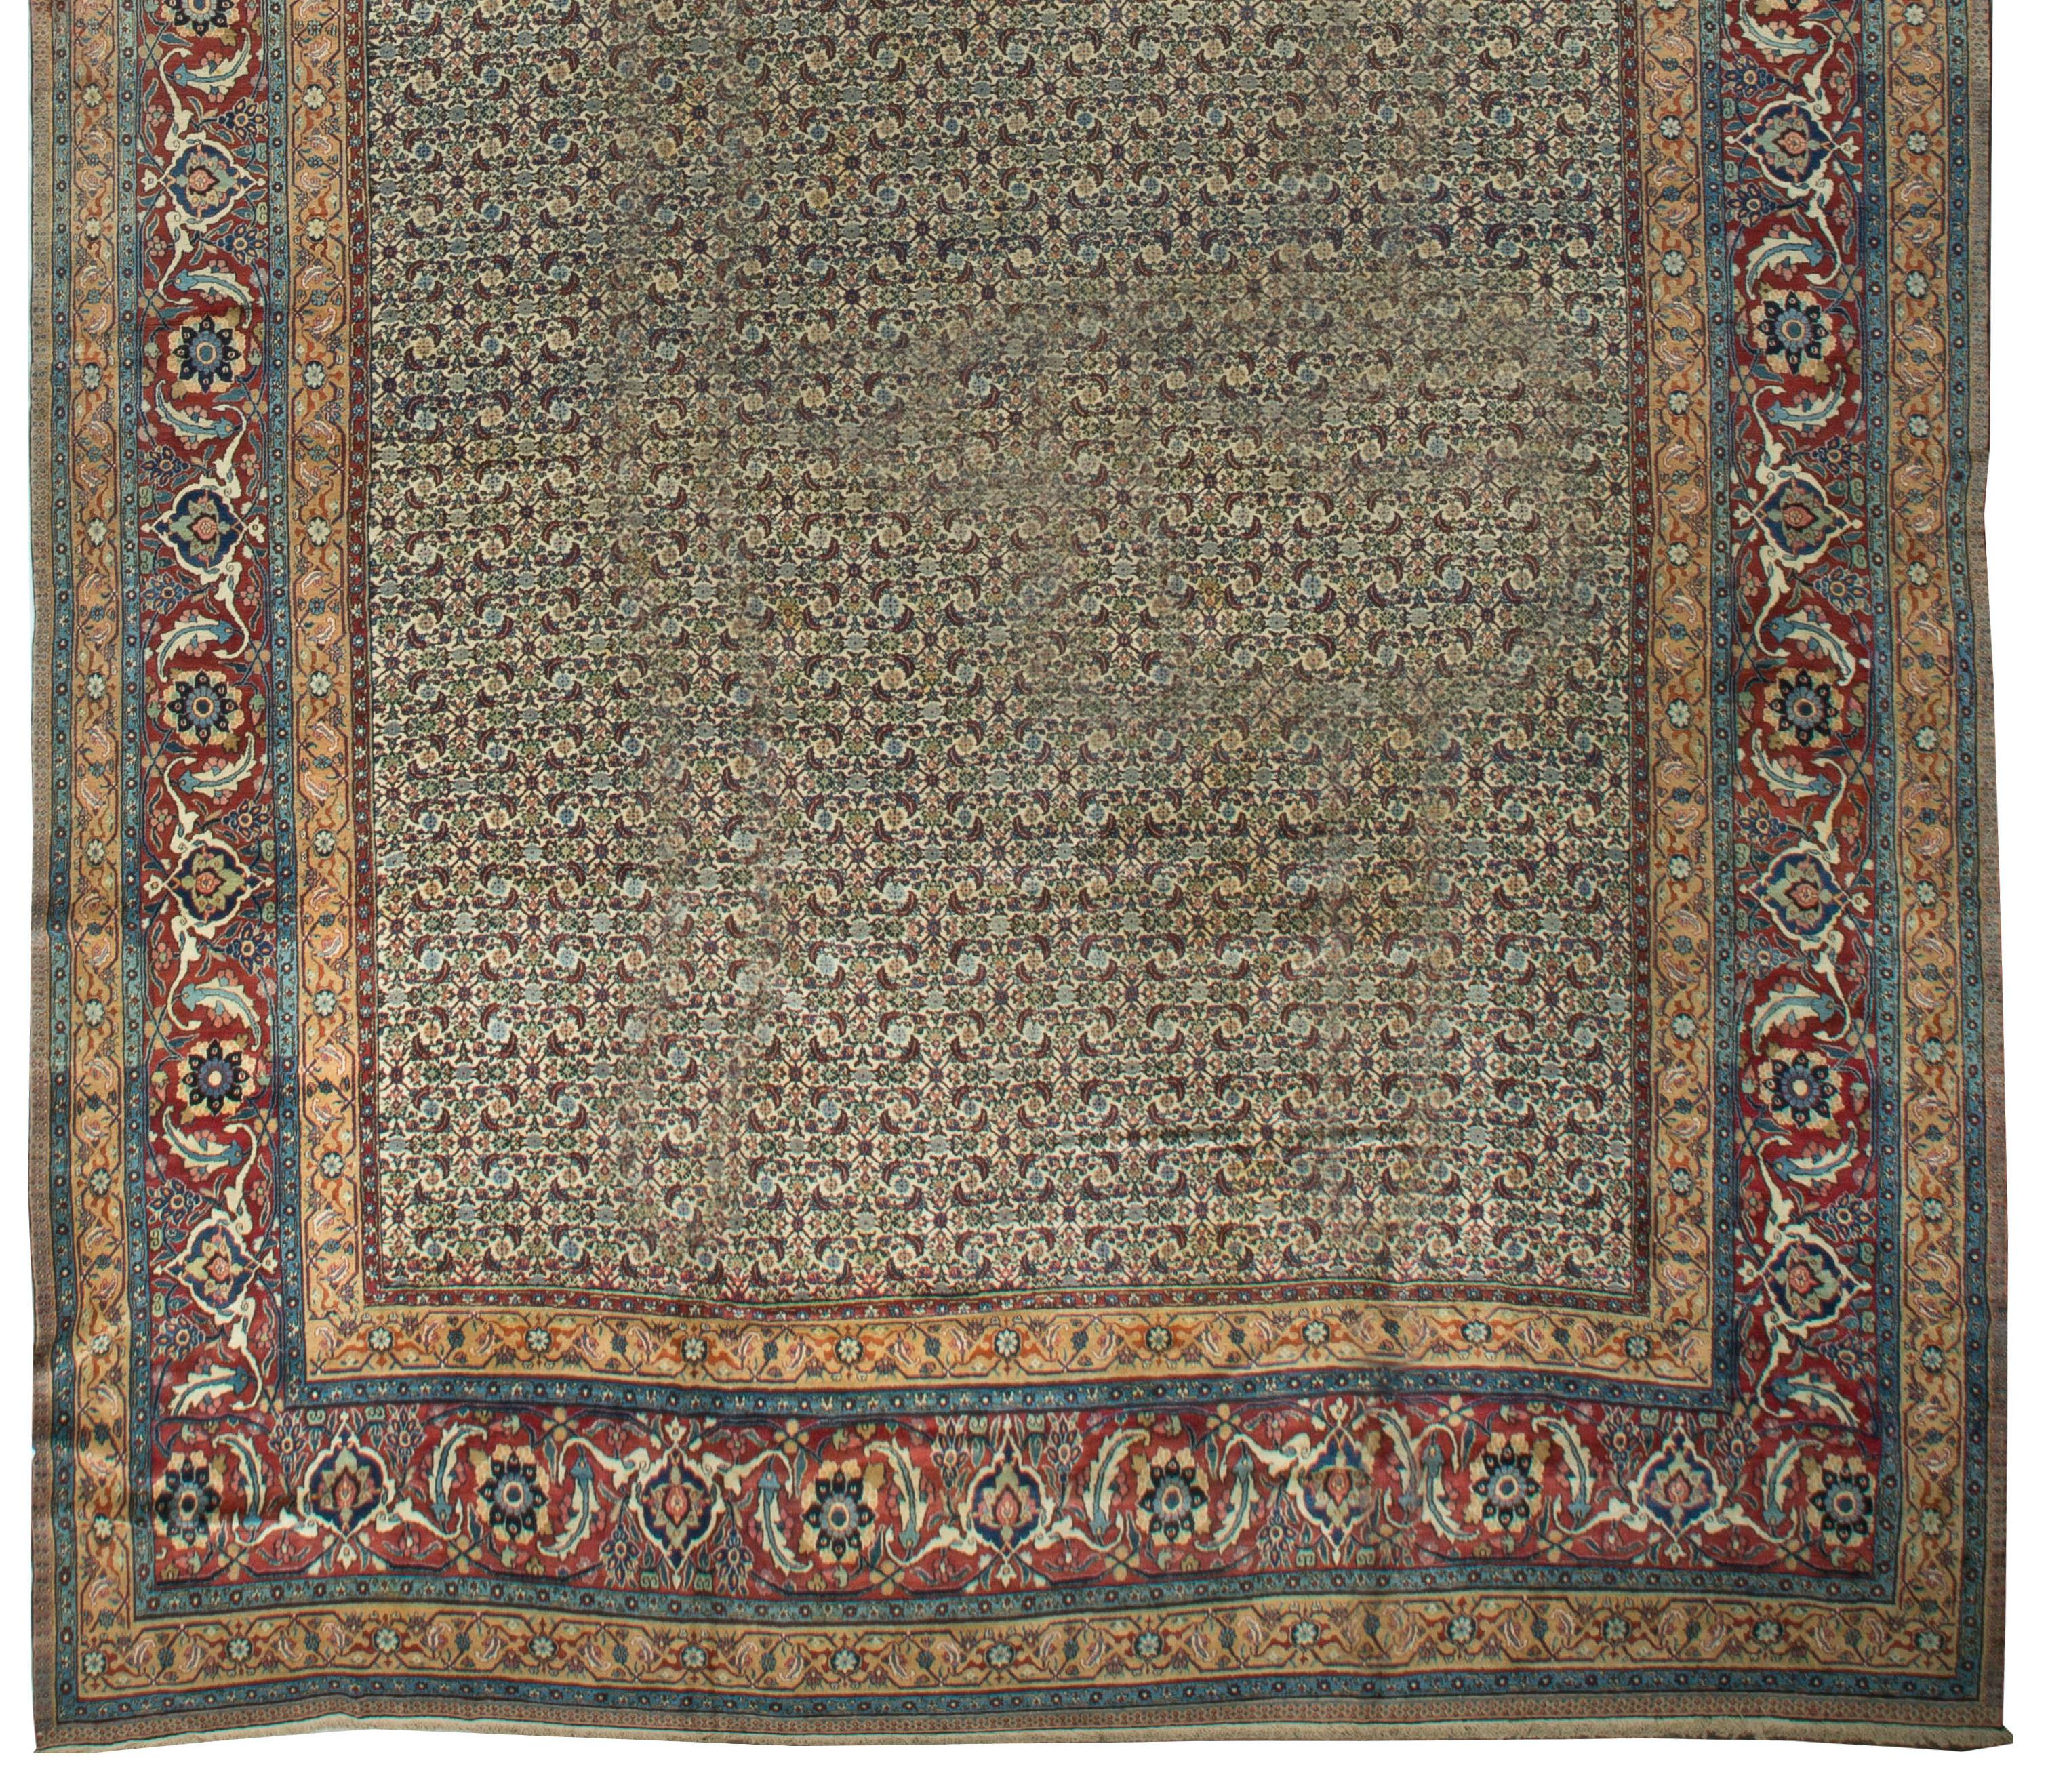 Early 20th Century Oversize Vintage Persian Khorassan Rug, circa 1920 16' x 26'2 For Sale